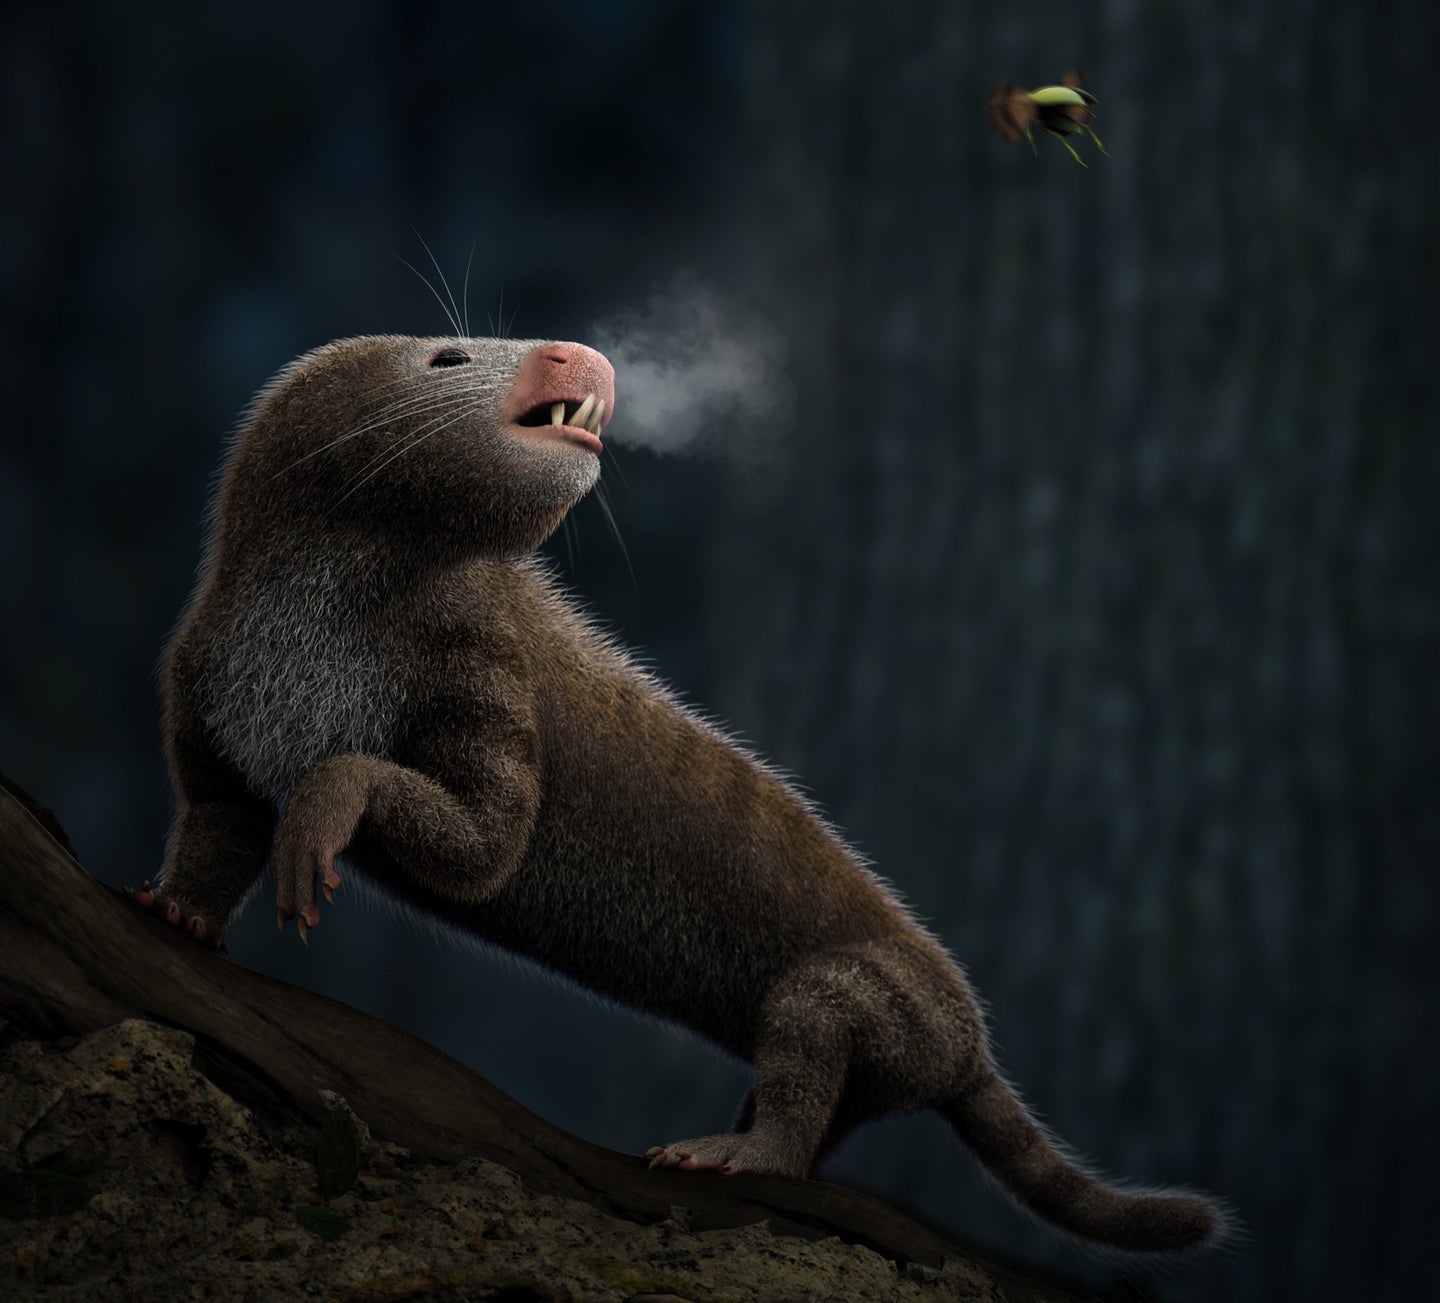 an illustration of an early mammal creature with fur and a few sharp teeth, breathing out a puff of air indicating cold weather. a bug flies in the corner